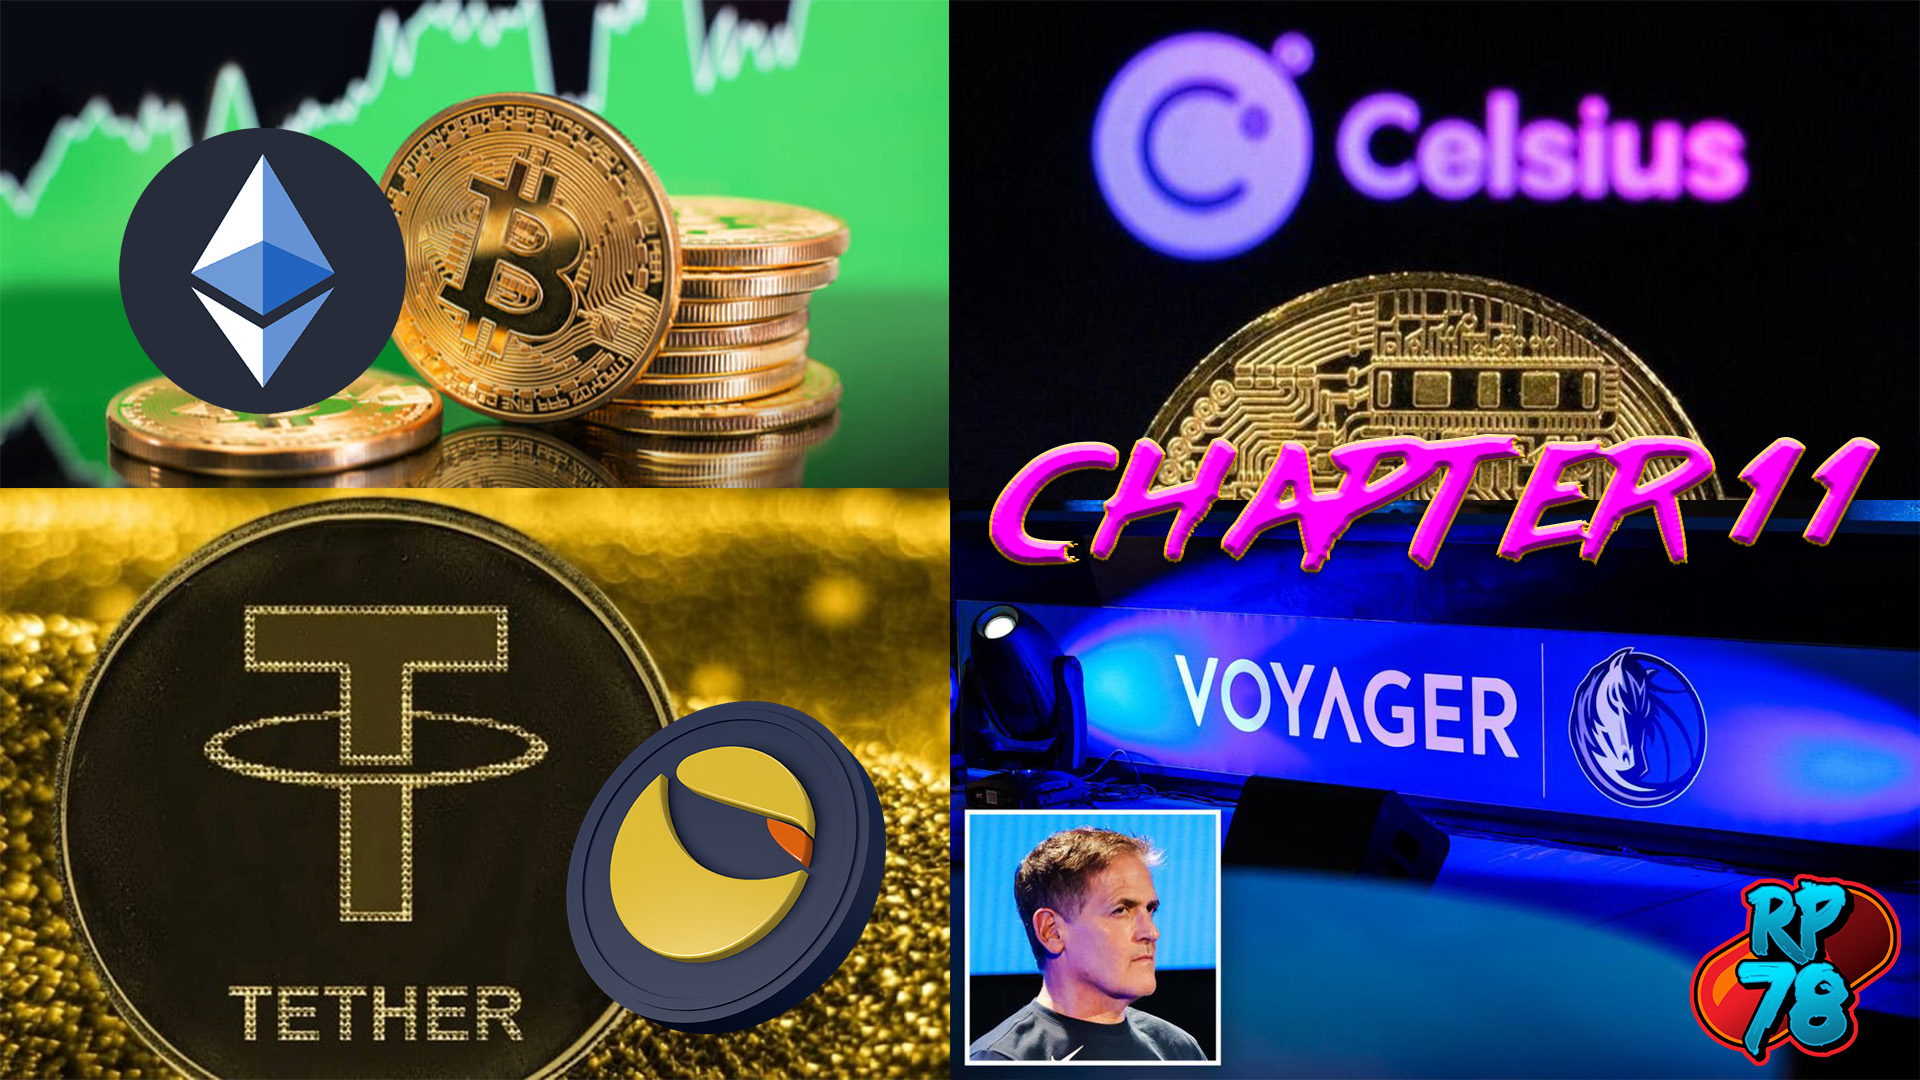 Crypto Exchanges Voyager & Celsius Filed For Chapter 11 - Are Investors Out of Luck?